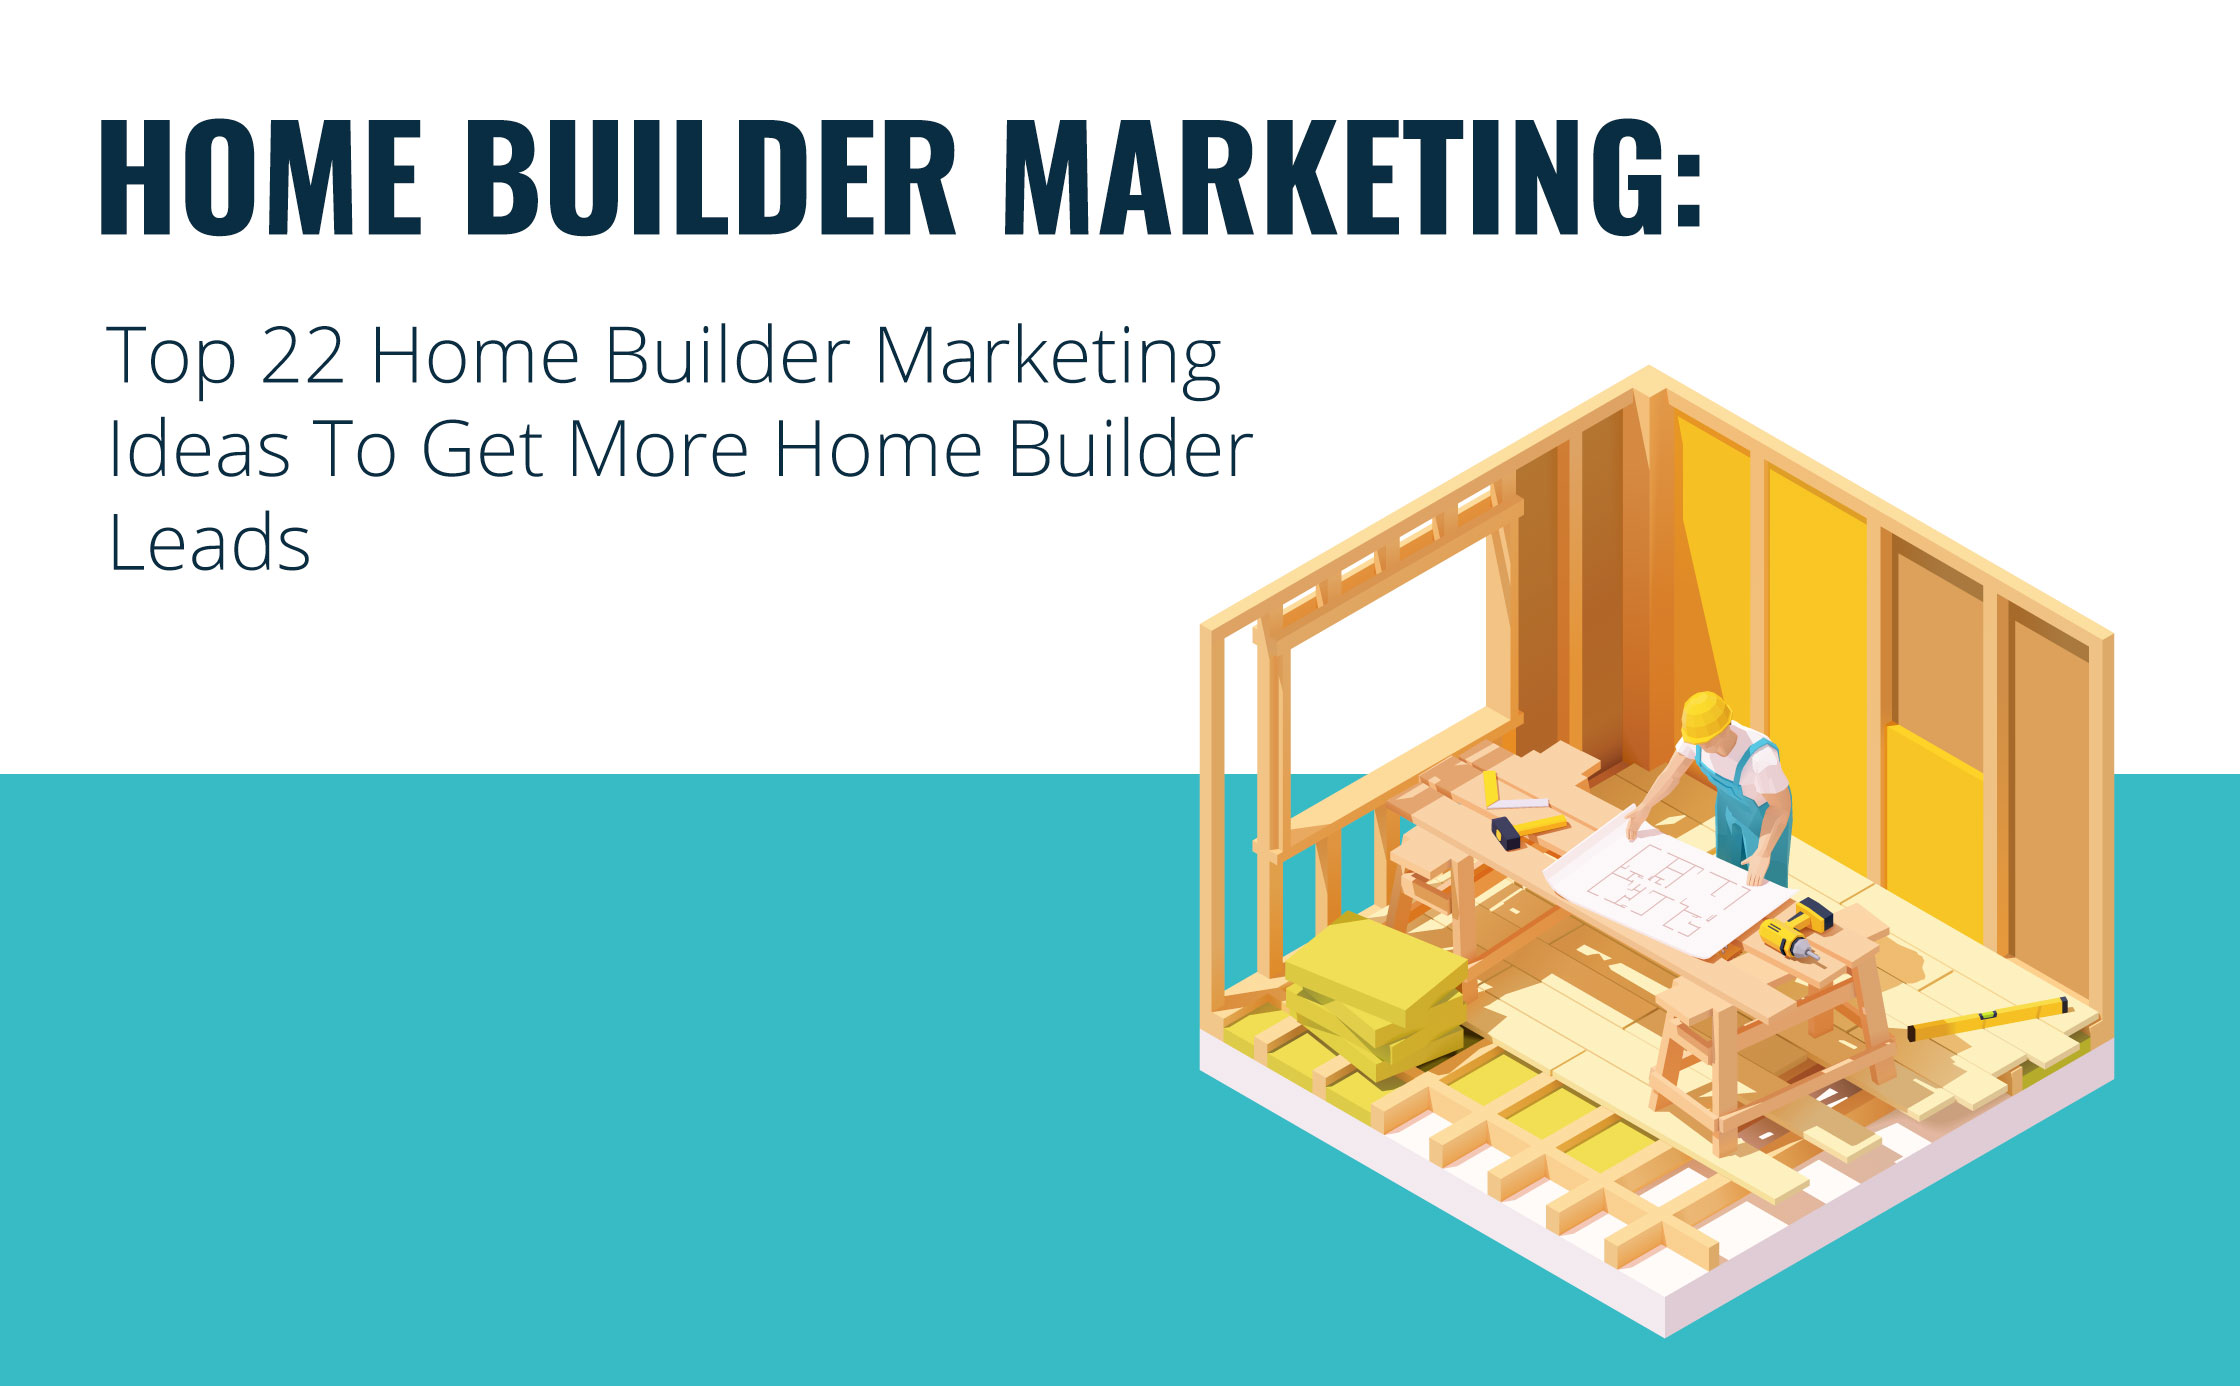 Home Builder Marketing: Top 22 Home Builder Marketing Ideas To Get More Home Builder Leads